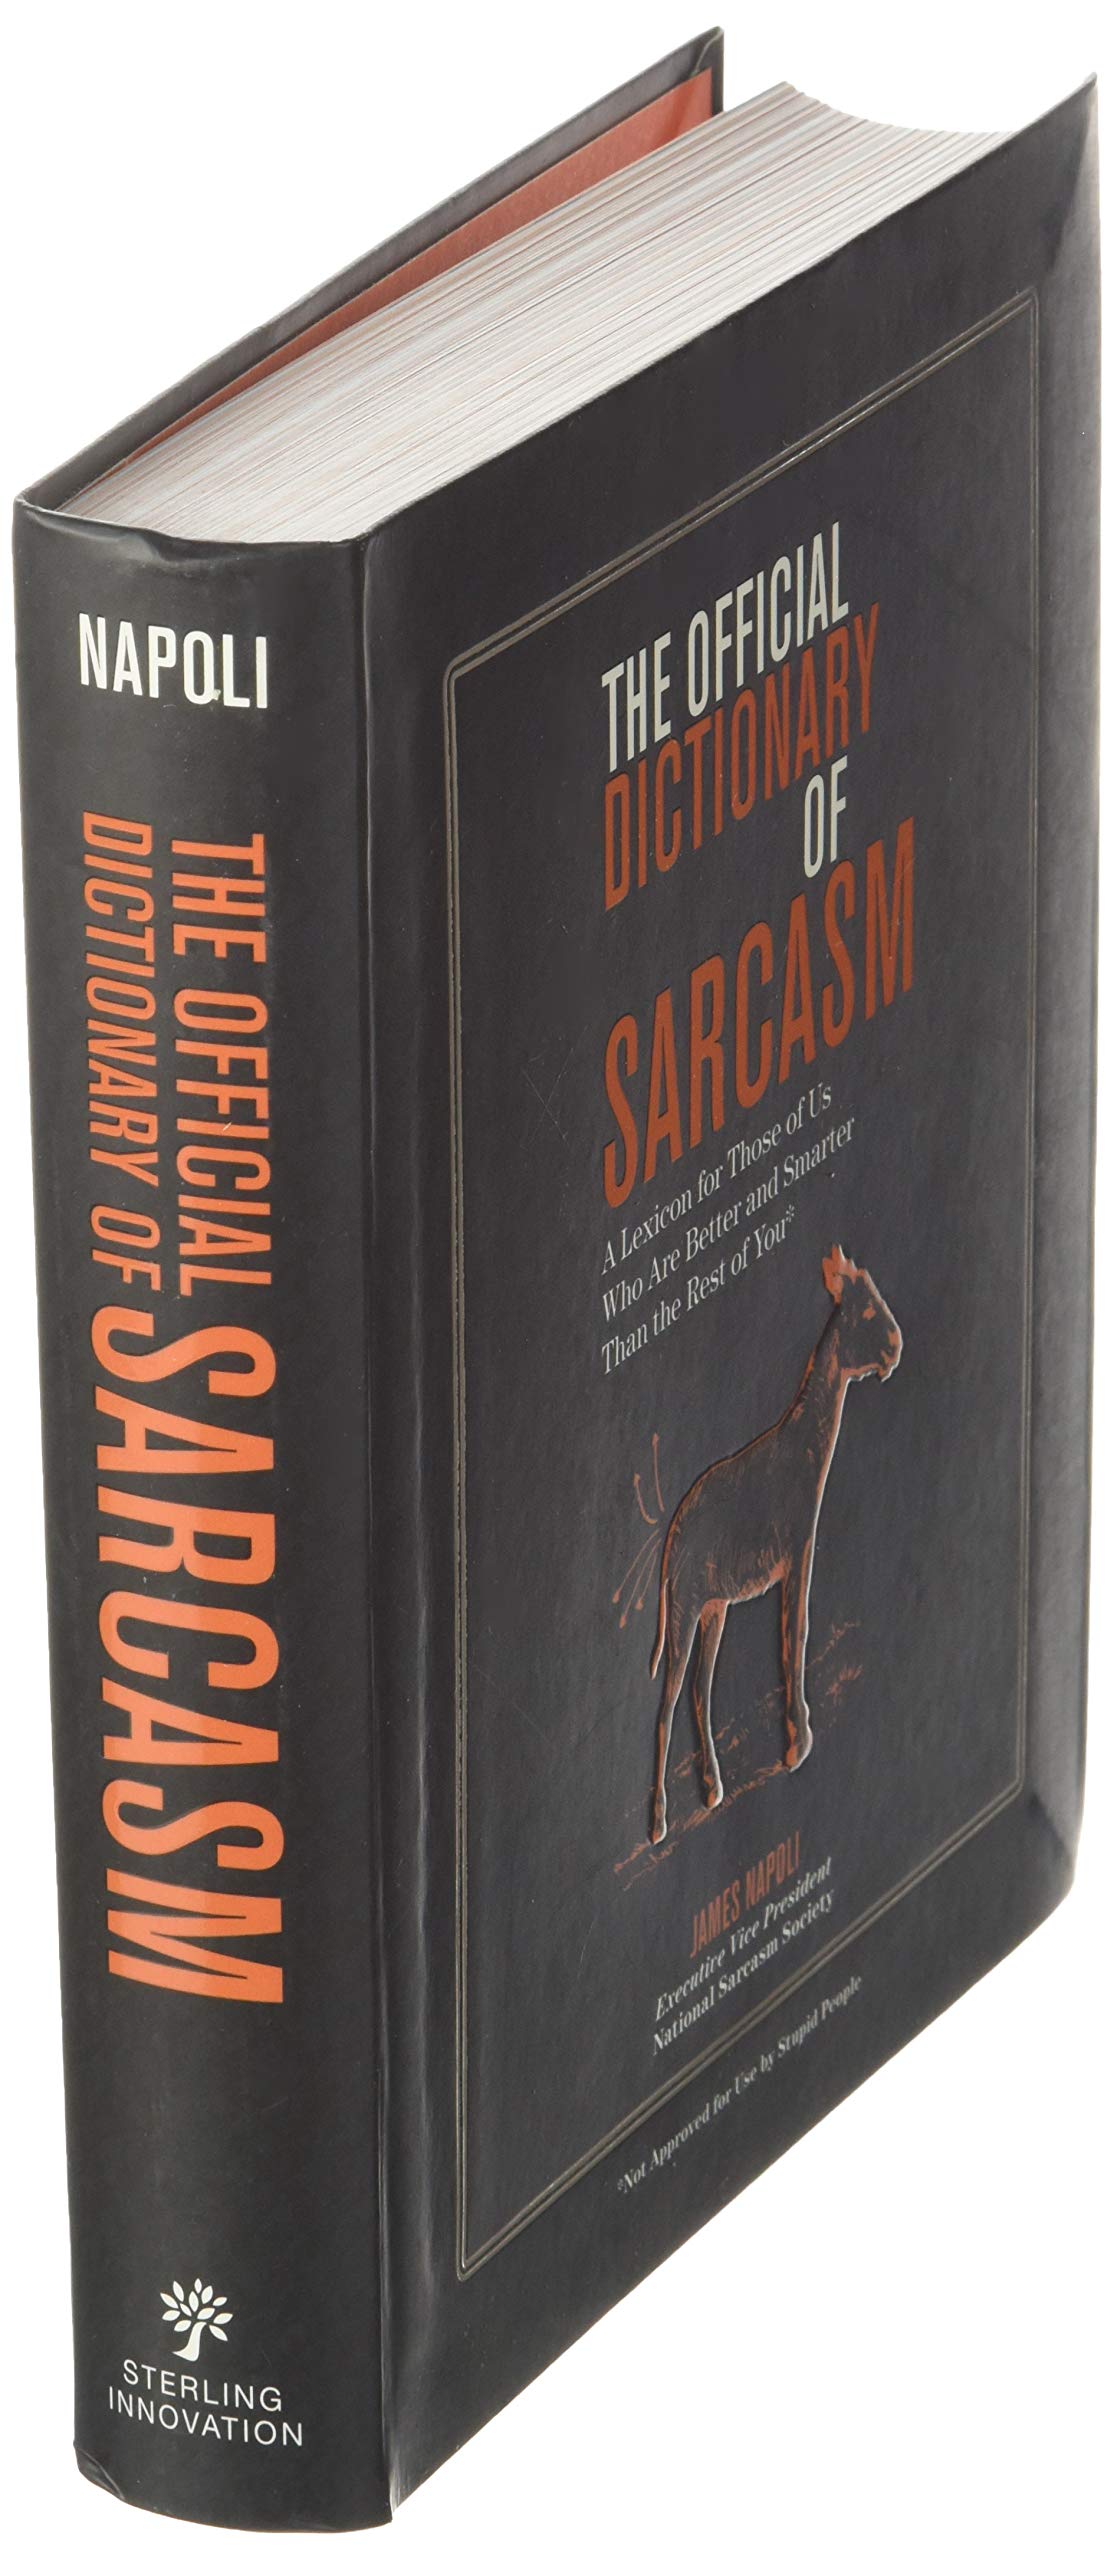 Cover of The Dictionary of Sarcasm